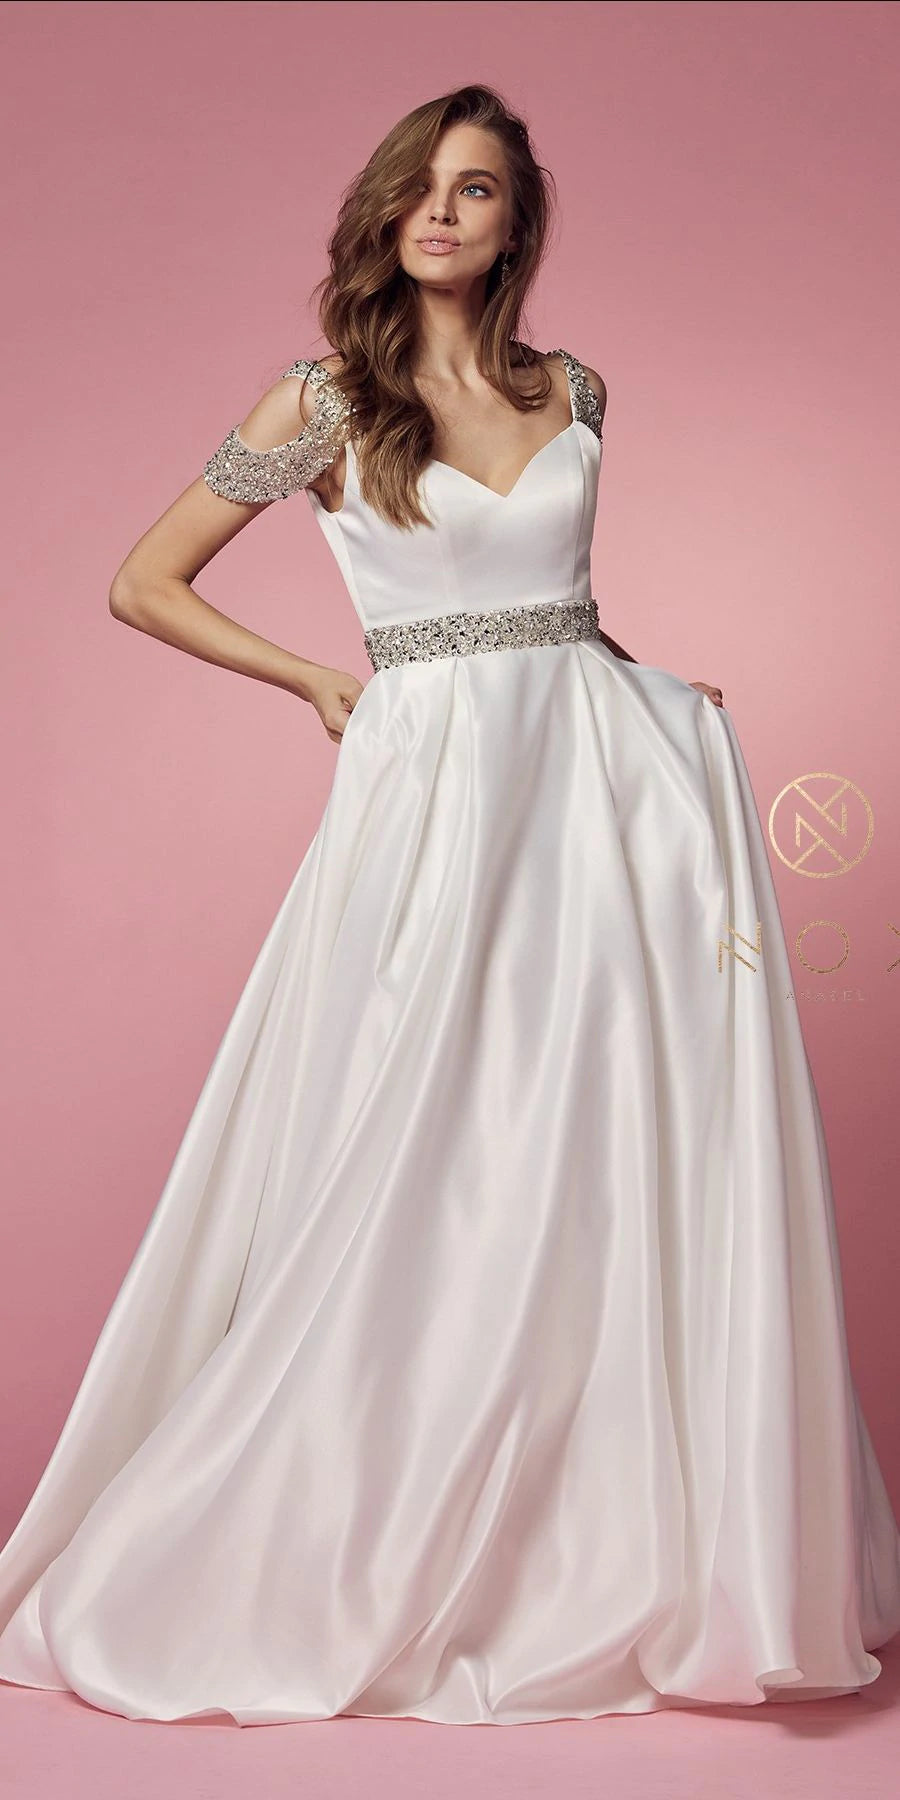 Nox Anabel R224W Long Satin A Line Ballgown Pockets Off the shoulder Dress  Pageant Bridal